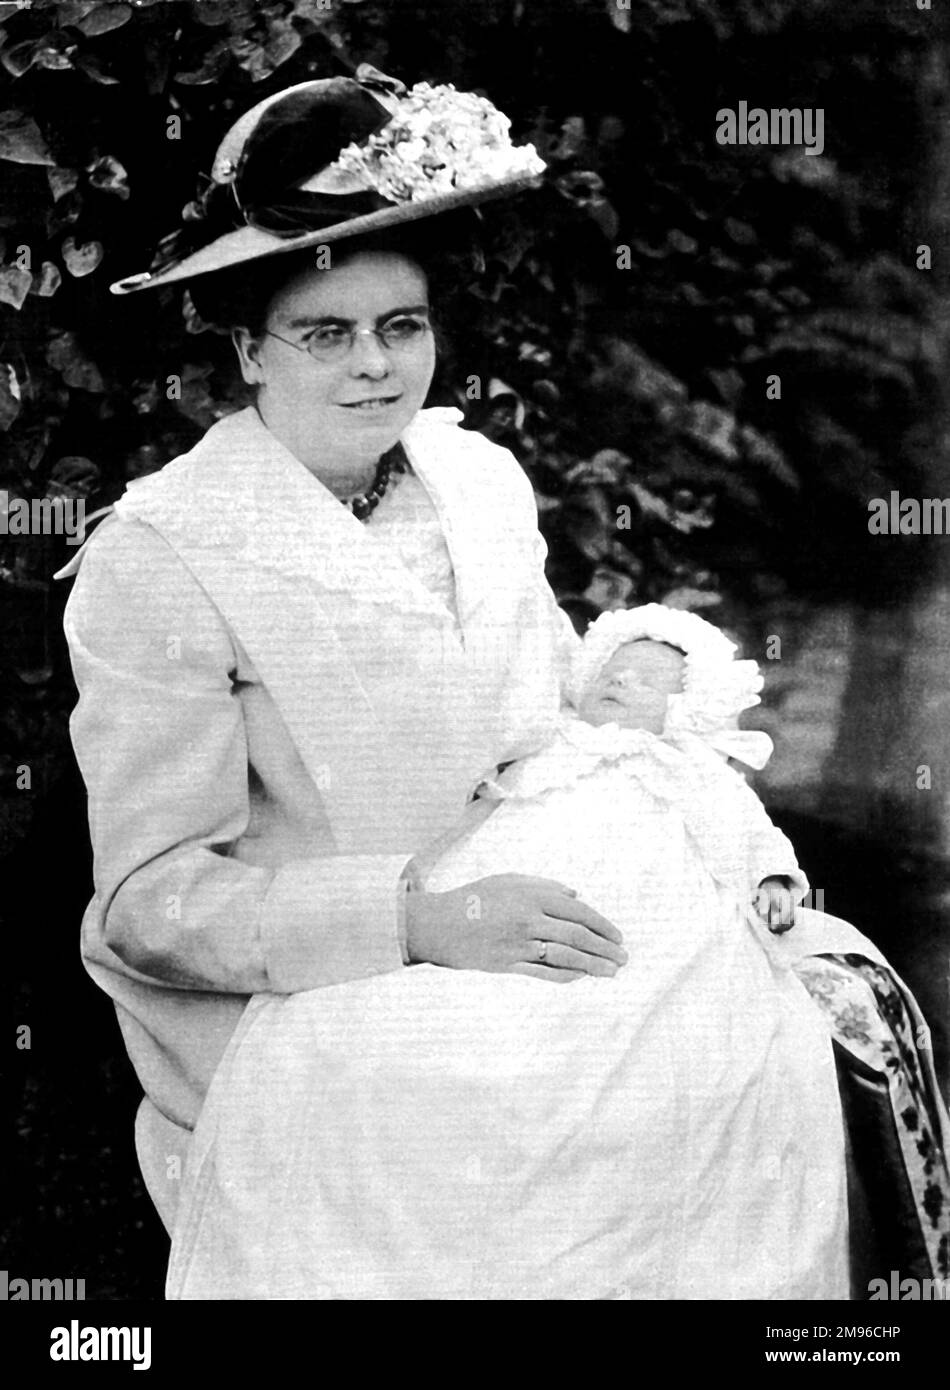 Eleanor Malby (1886-1956), wife of Reginald Malby, official photographer to the Royal Horticultural Society, seen here as a young Edwardian woman with a baby.  Eleanor was a photographer in her own right, and after Reginald's death kept the company of Reginald A Malby & Co running.  Eleanor was awarded the prestigious Veitch Memorial Medal in 1941 for her photographic work on garden subjects. Stock Photo